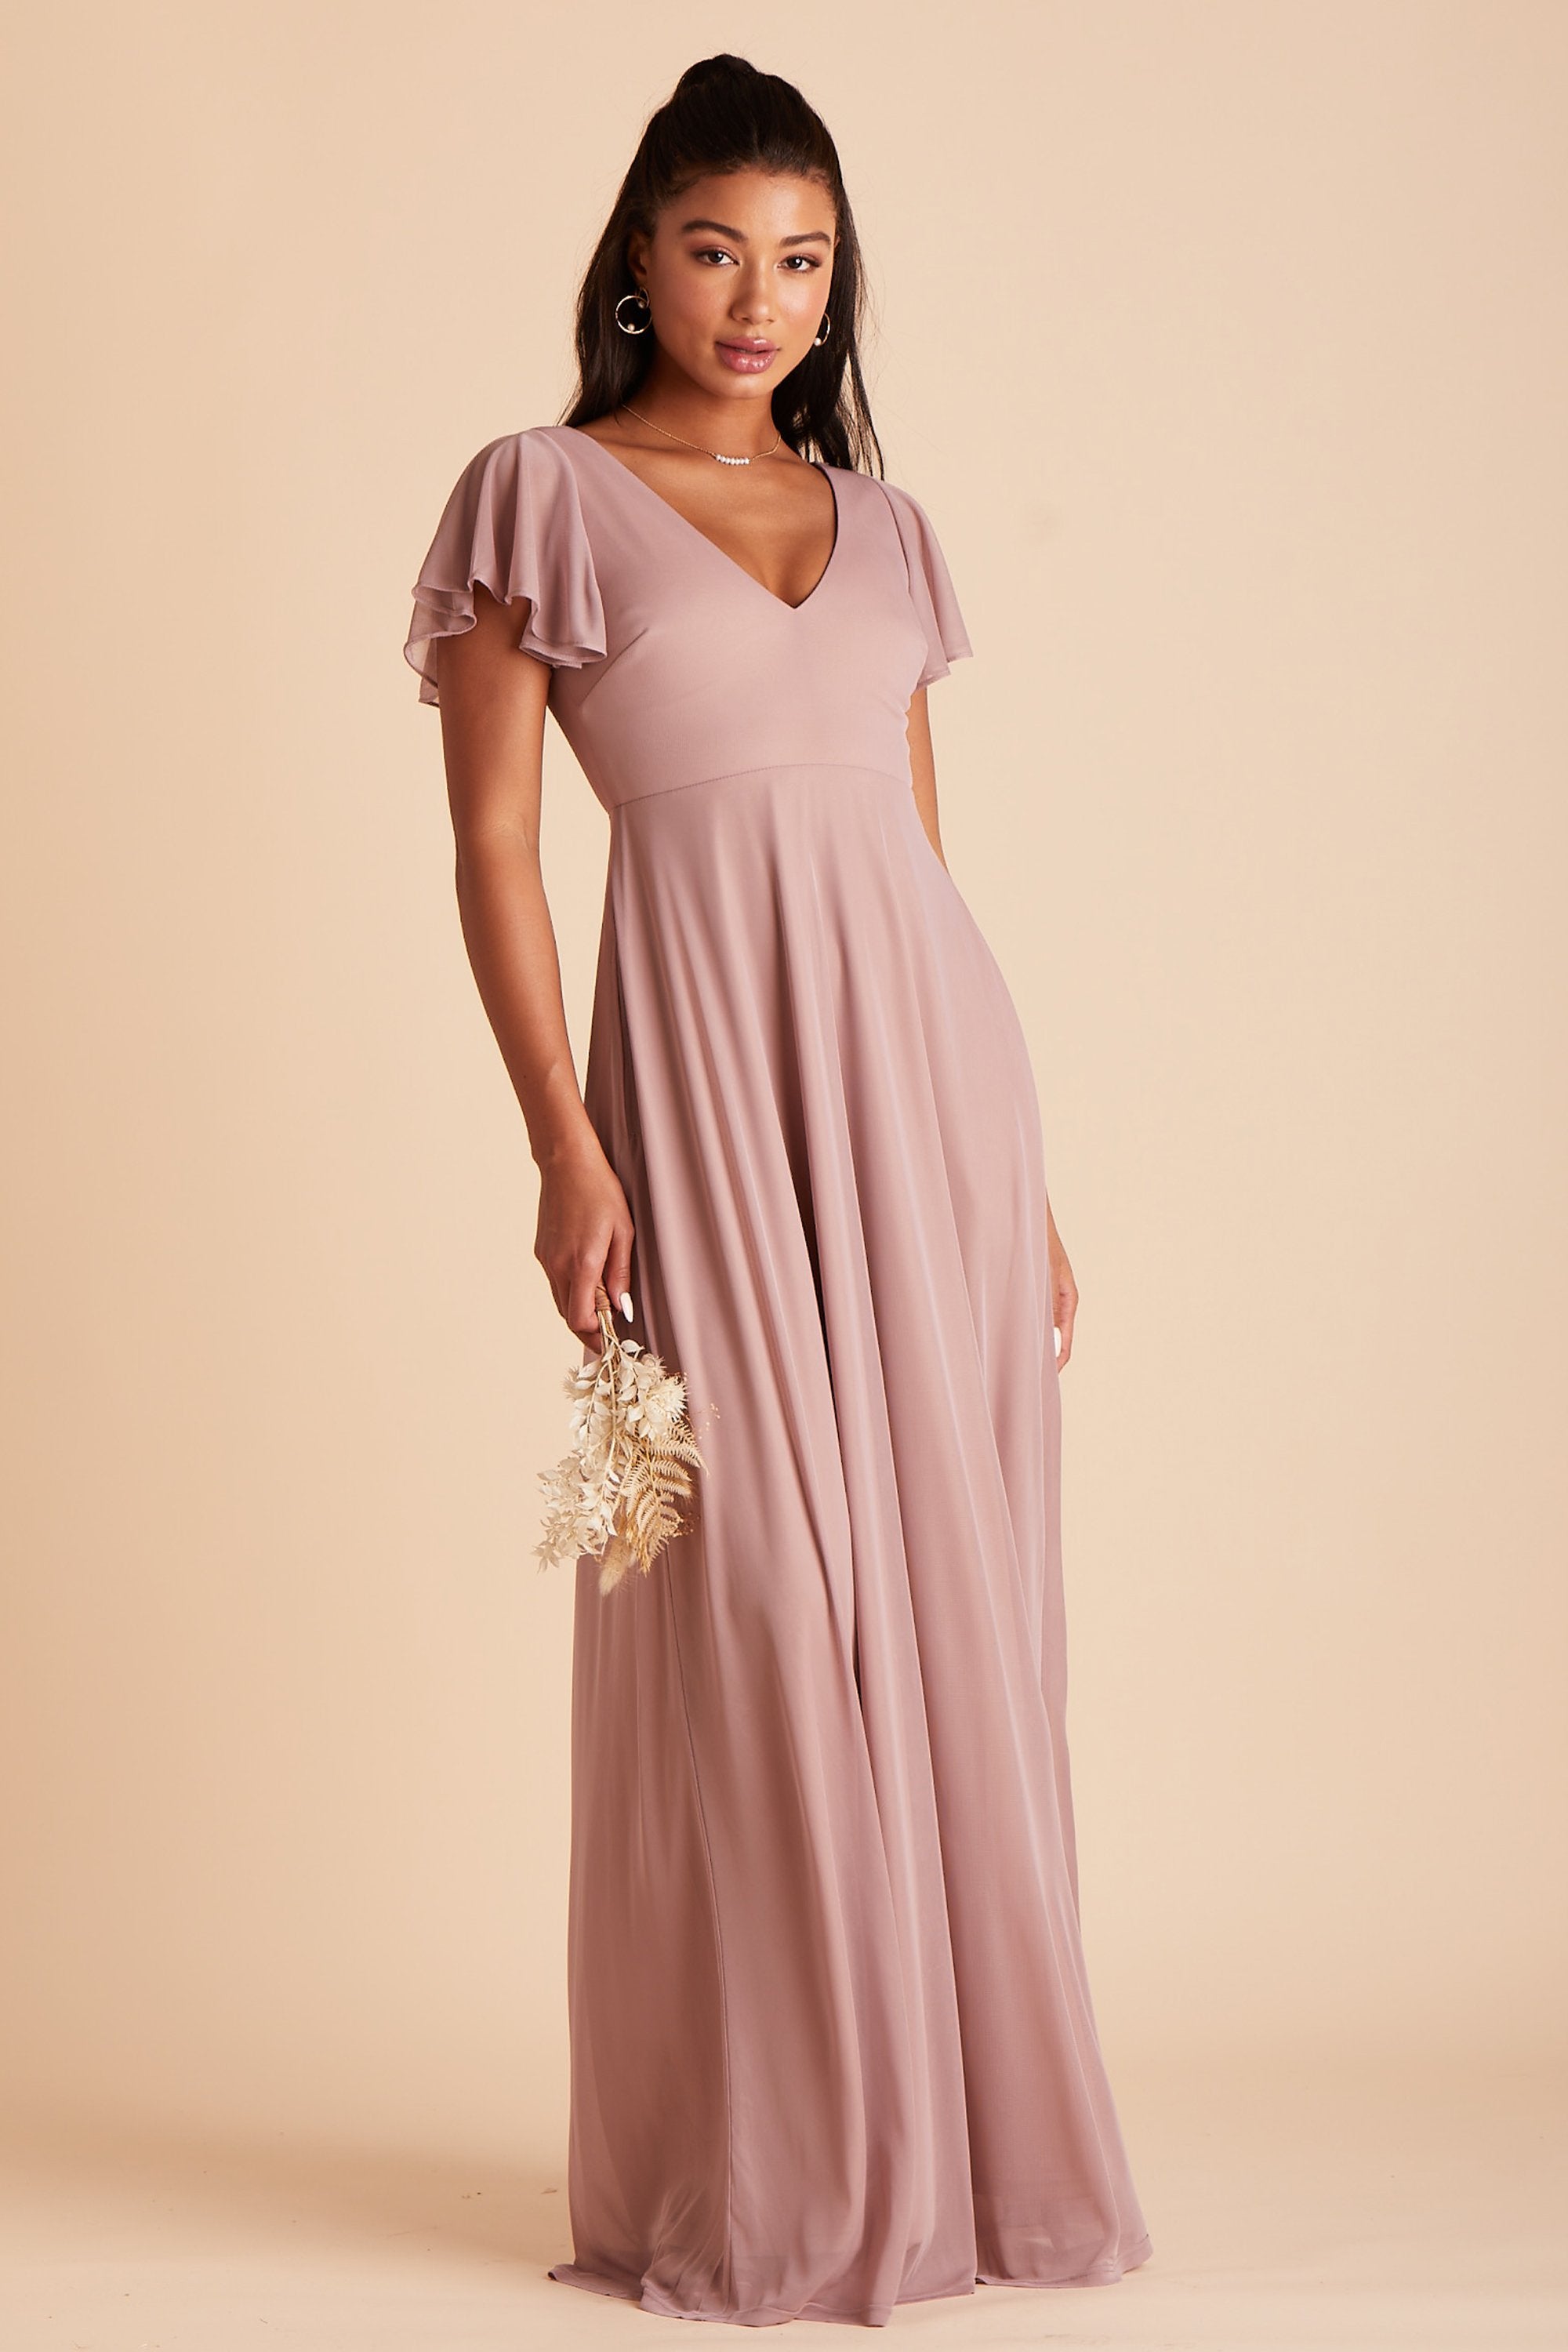 Hannah bridesmaids dress in mauve chiffon by Birdy Grey, front view